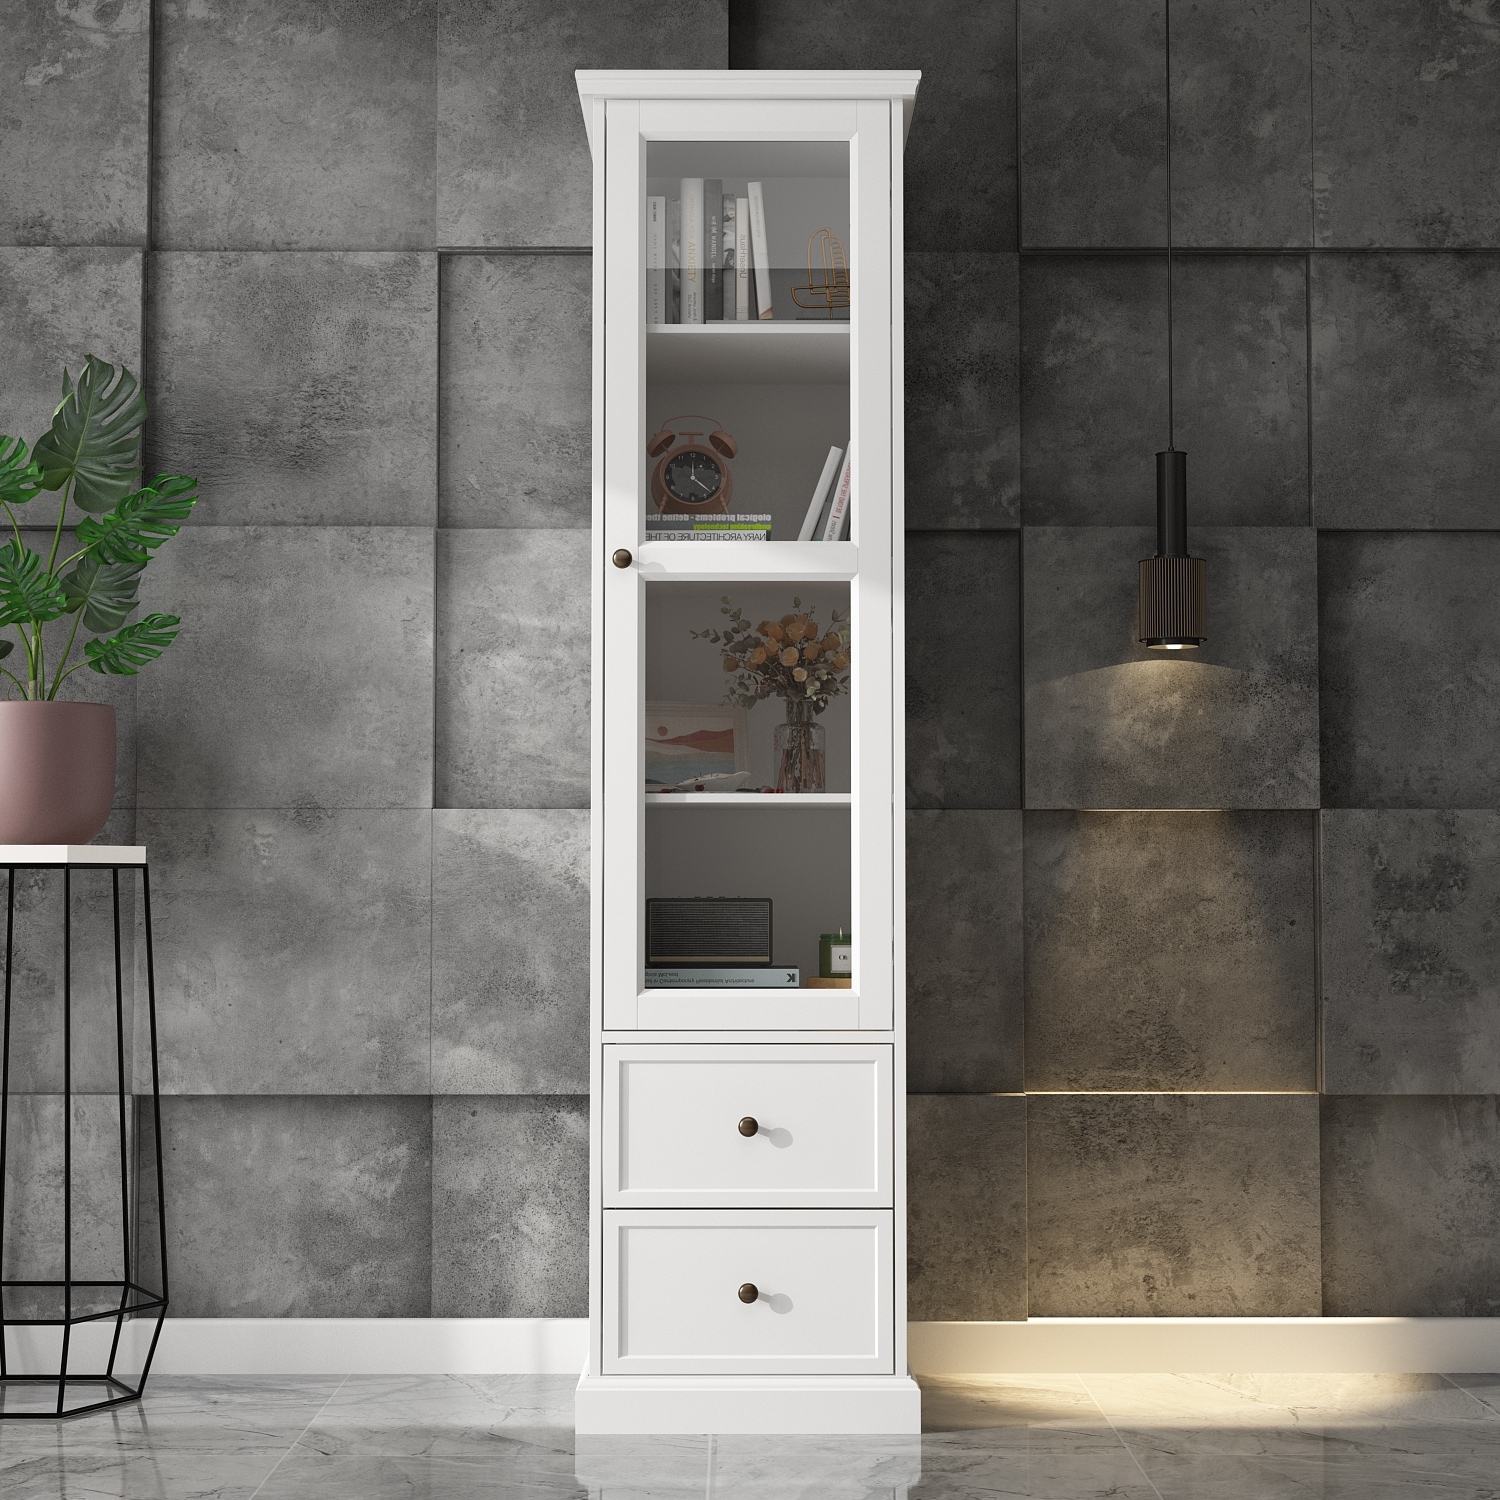 https://ak1.ostkcdn.com/images/products/is/images/direct/b75b32c52b18c3e1b2bfd5afbe47b53d4b6df716/Tall-Display-Cabinet-with-Tempered-Glass-Door-Storage---White-Walnut.jpg